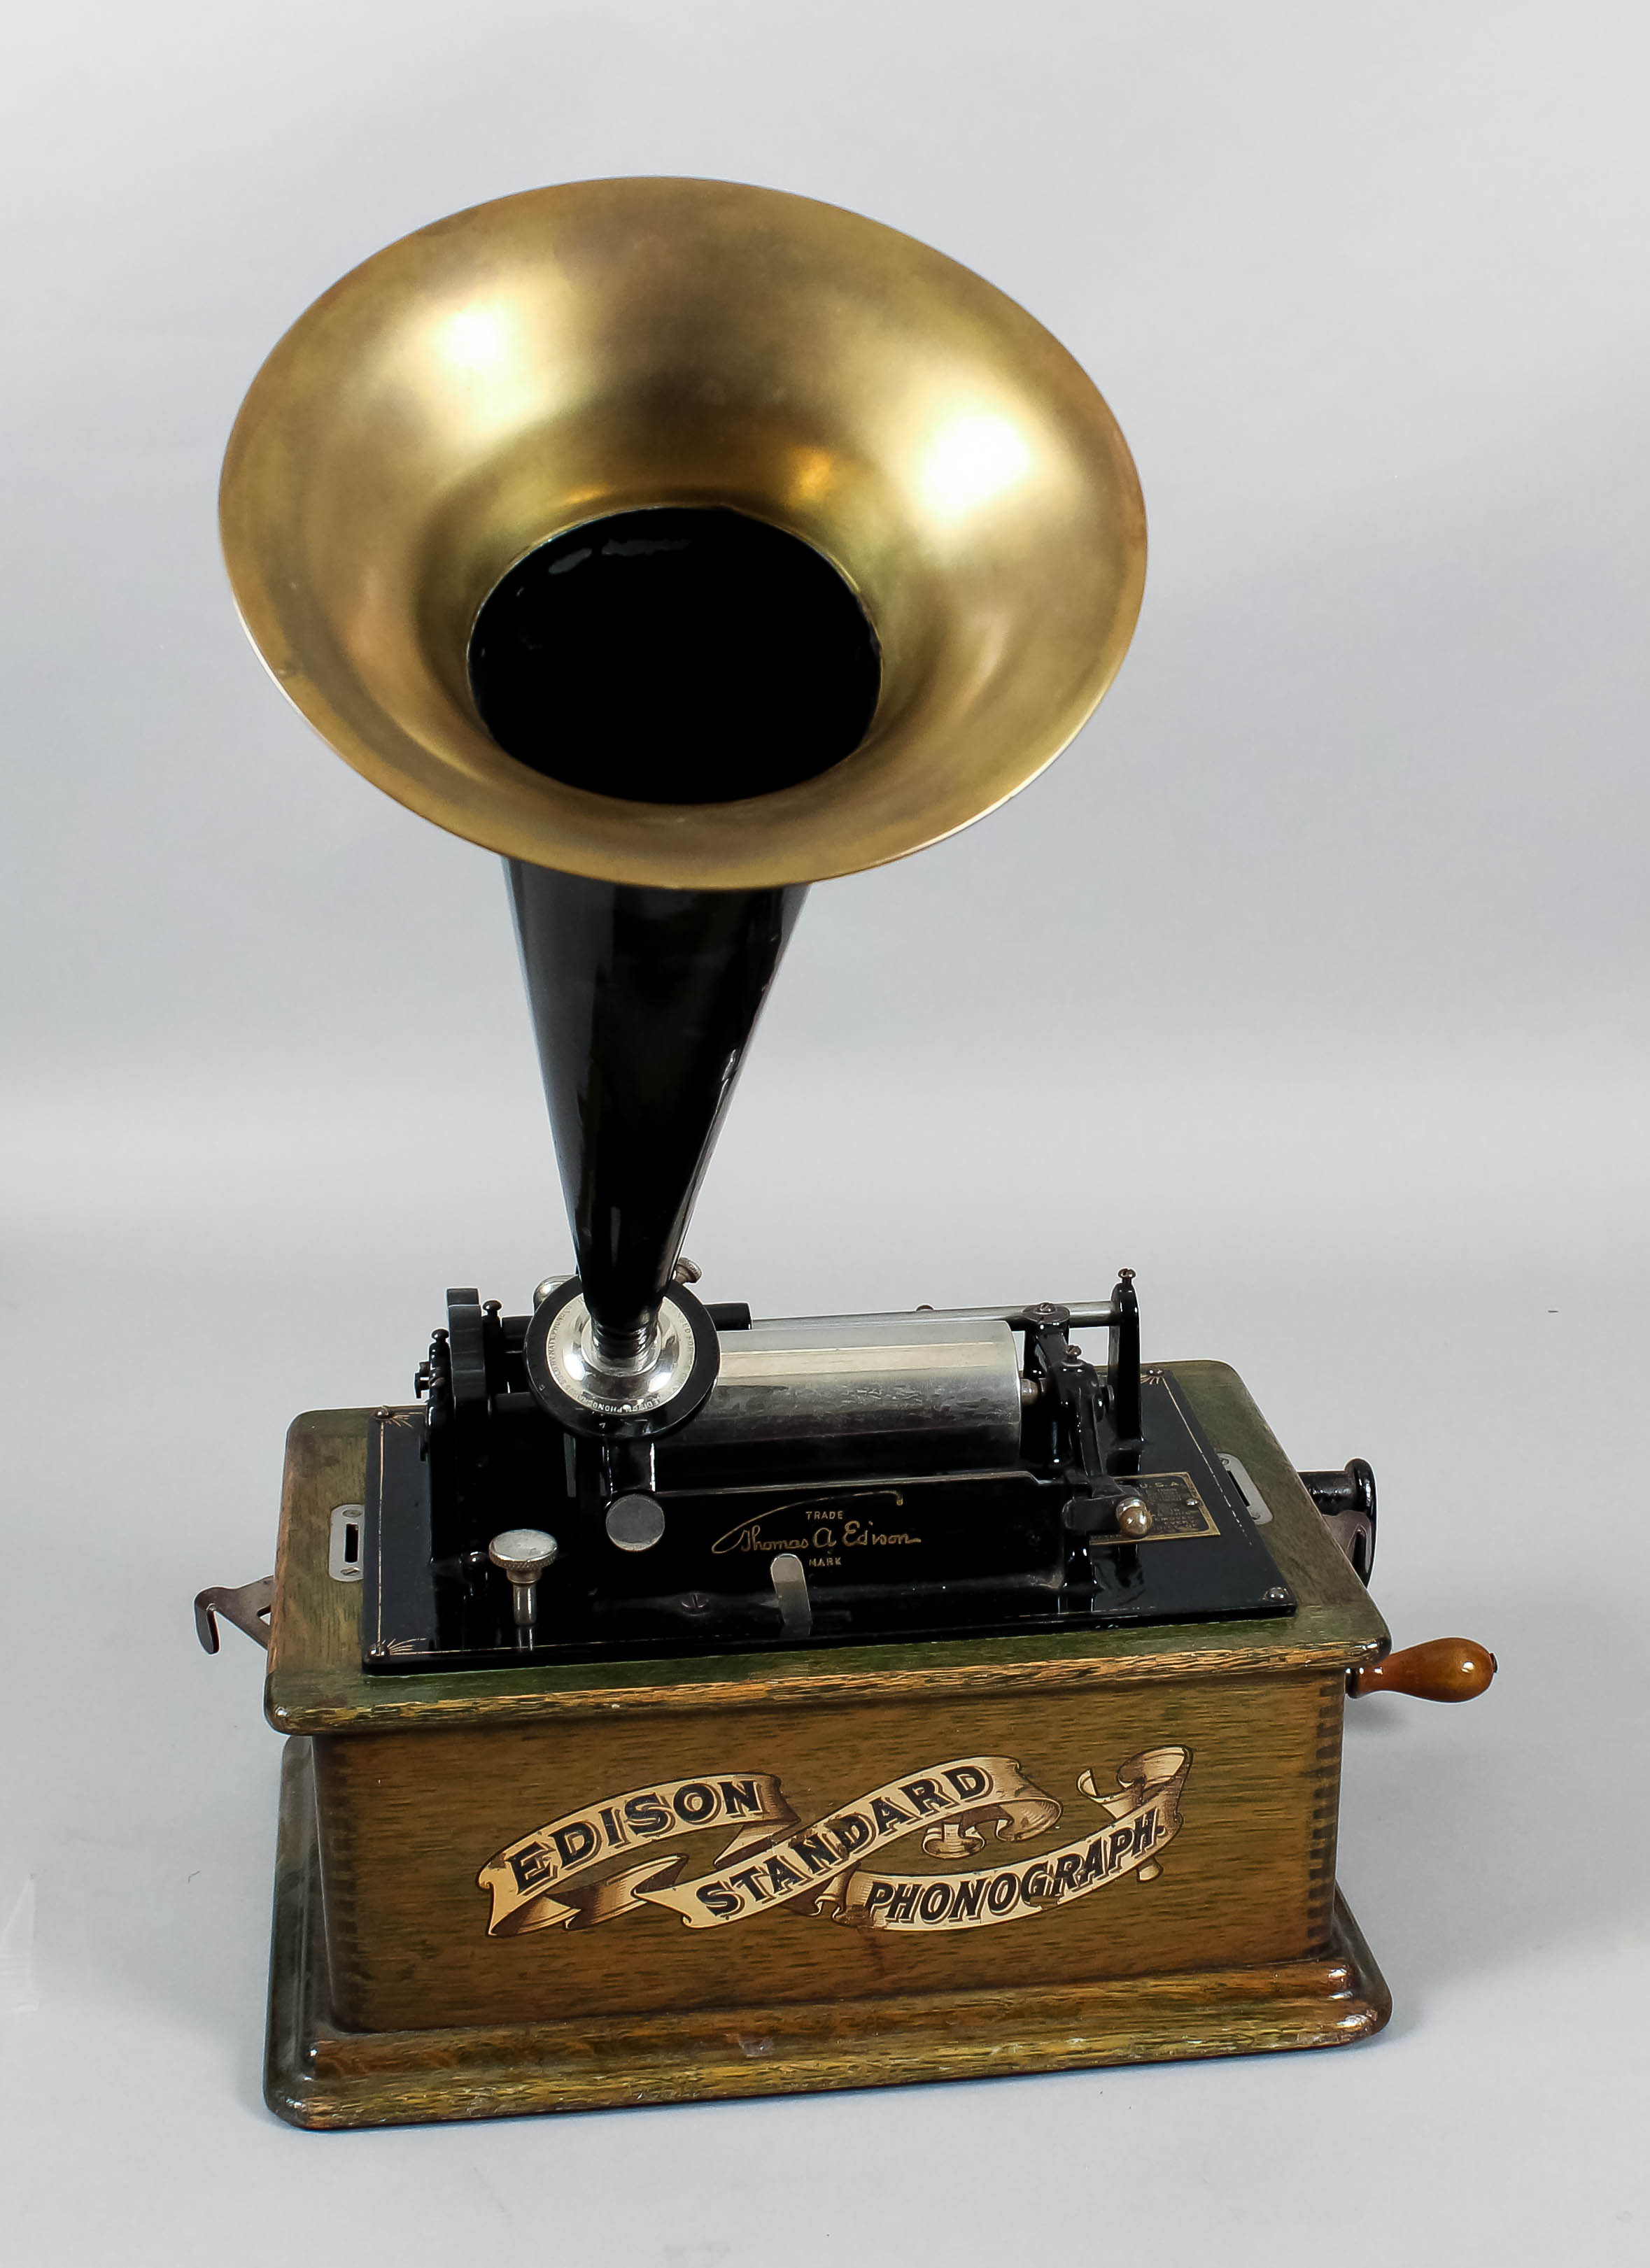 An early 20th Century Edison phonograph - "Standard Model A", No. 180561 (circa 1902), with large